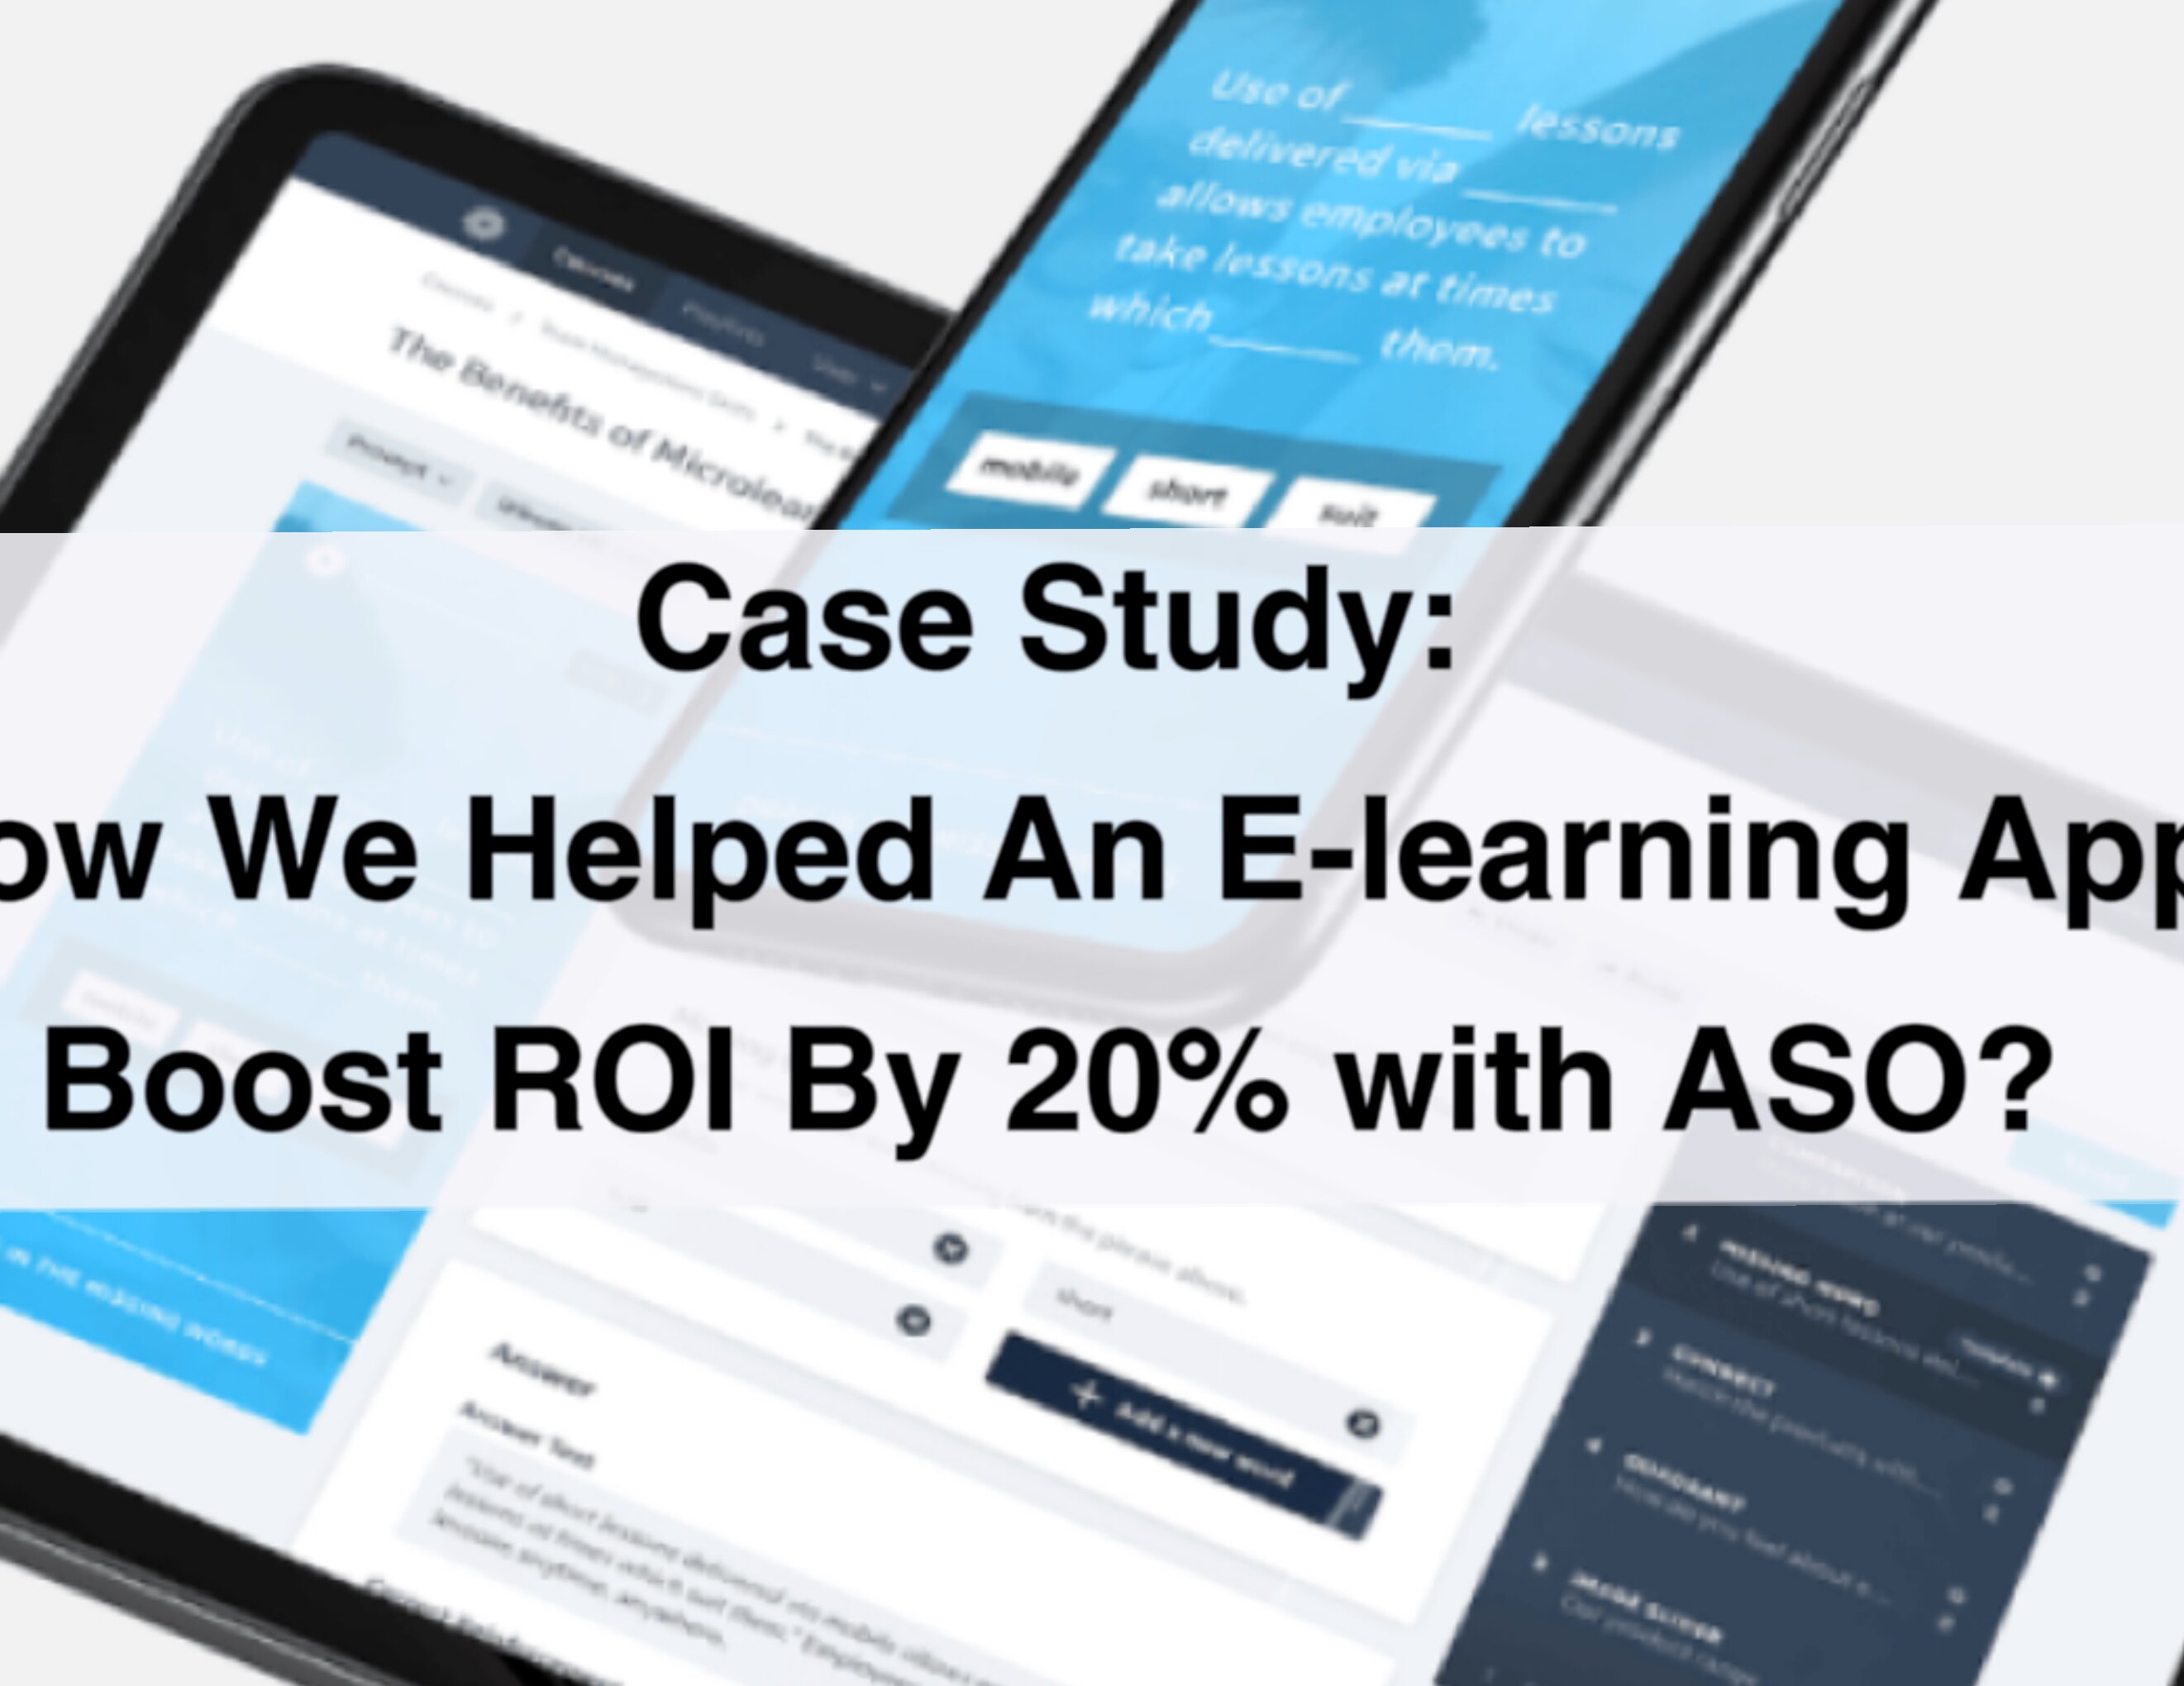 Case Study: How We Helped An E-learning App Boost ROI By 20% with ASO? 